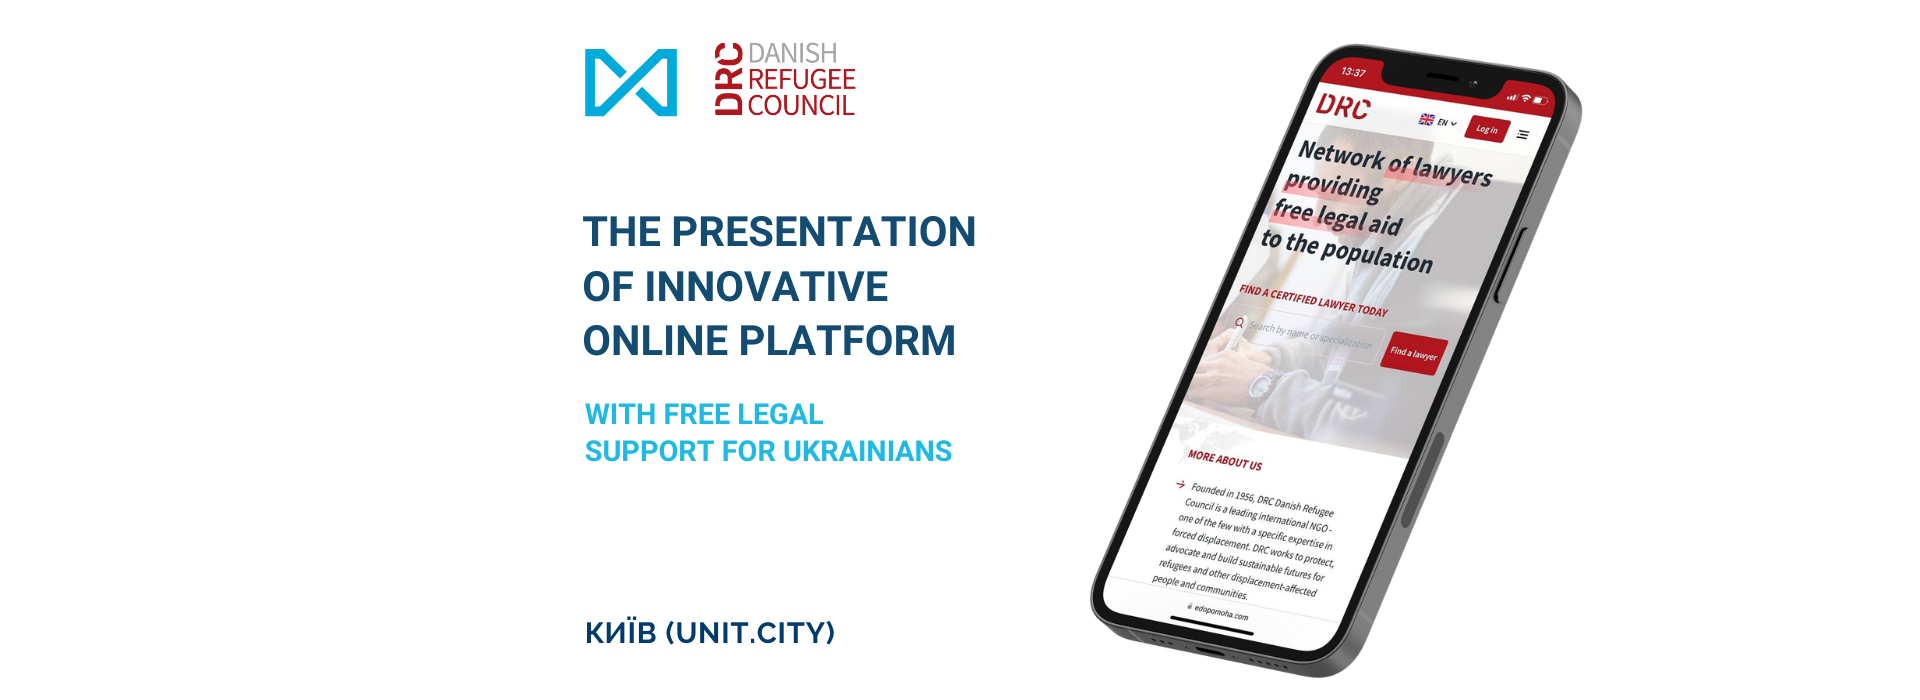 The Presentation of Innovative Online Platform with Free Legal Support for Ukrainians